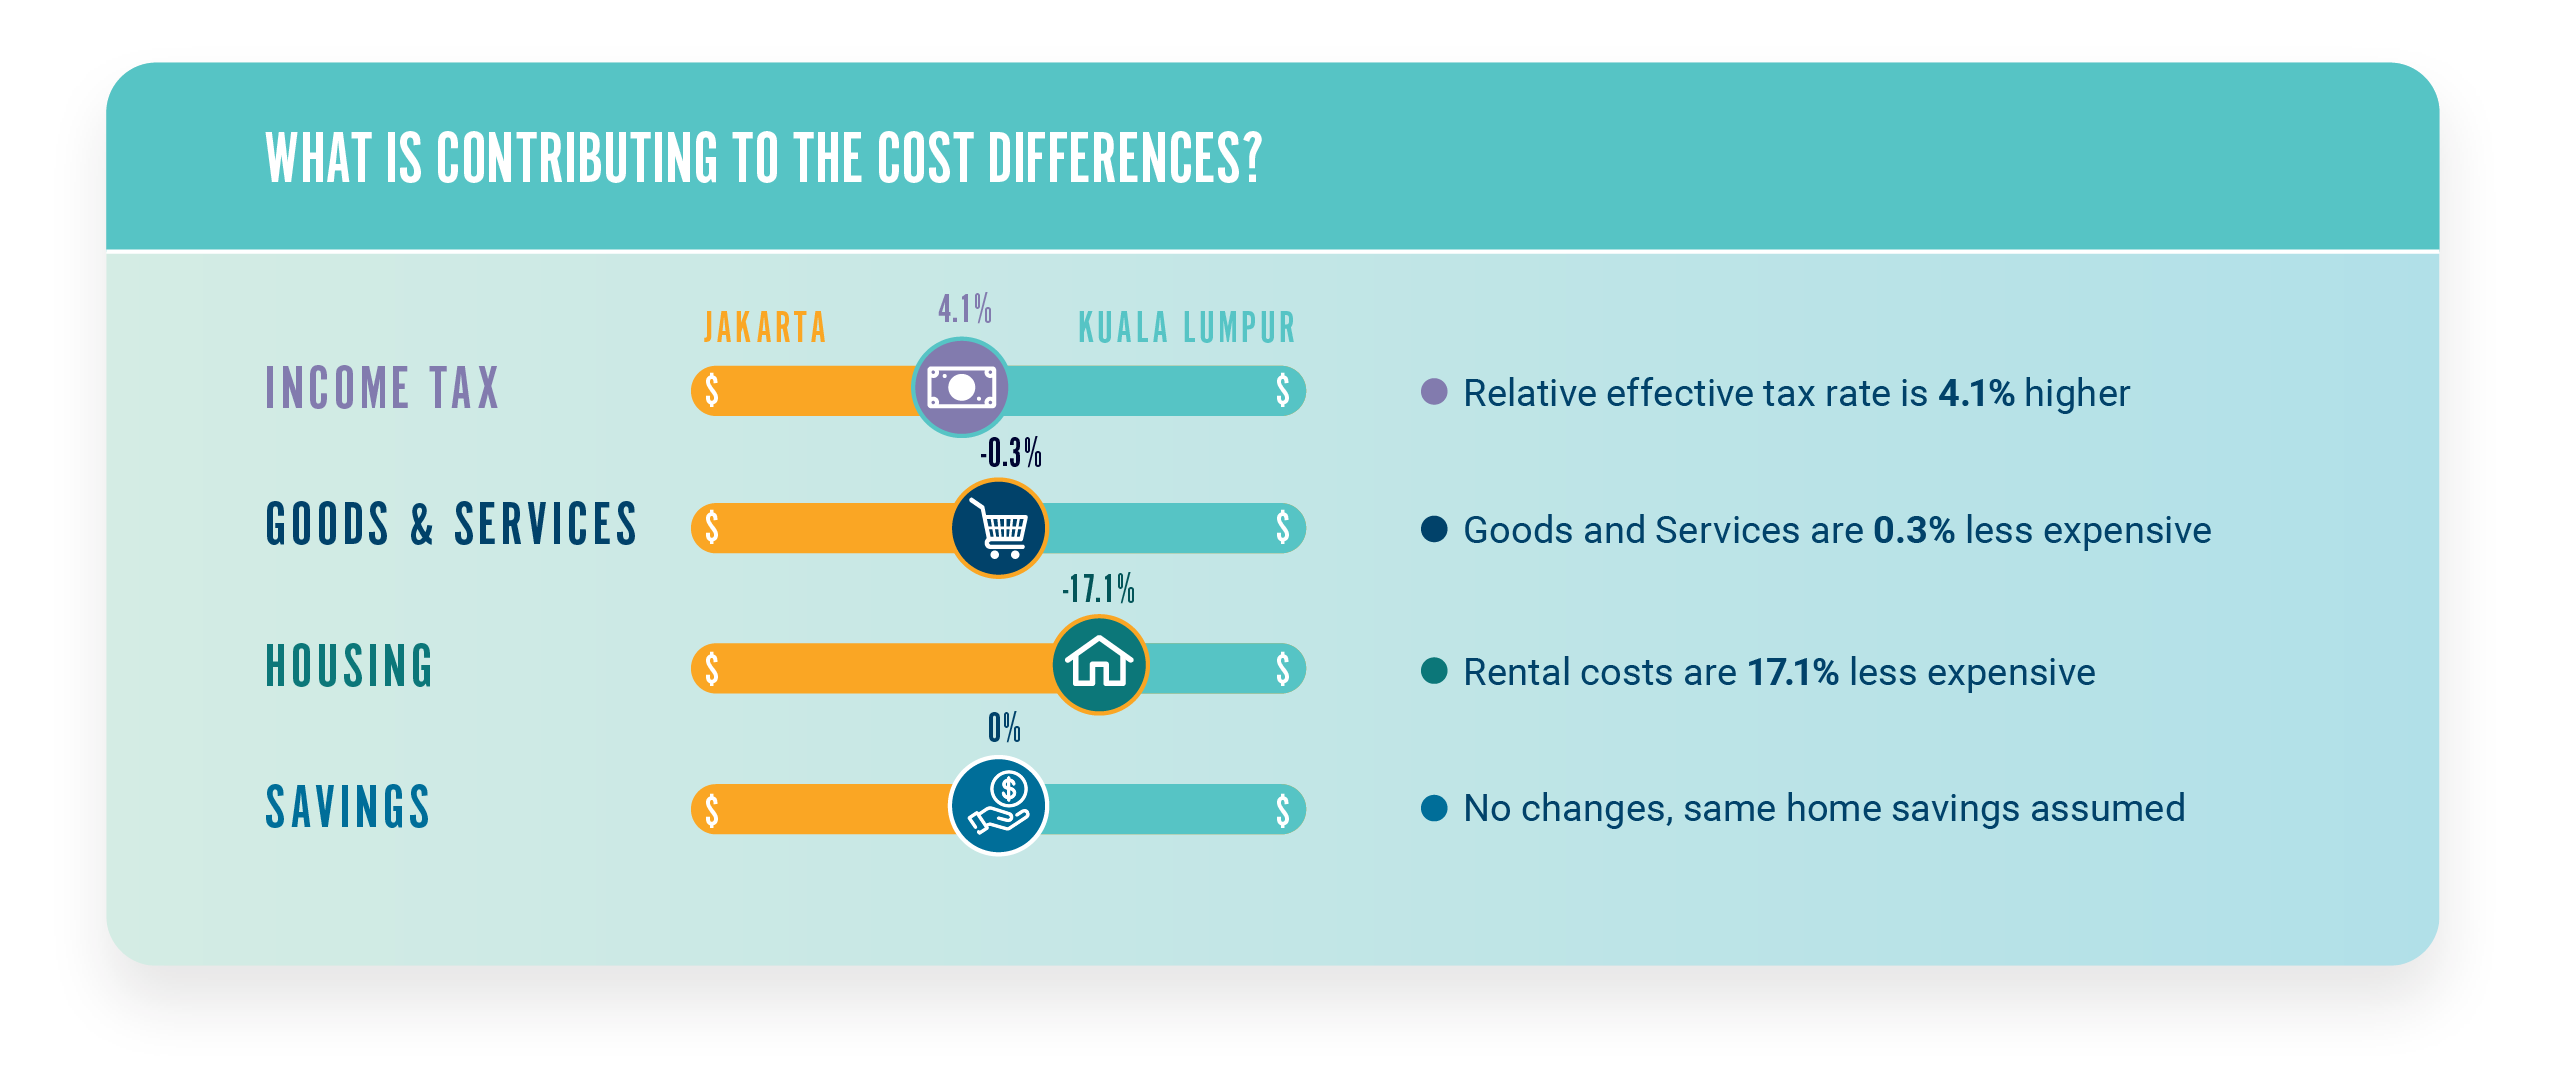 AIRINC Setting Pay Level Cost Difference infographic